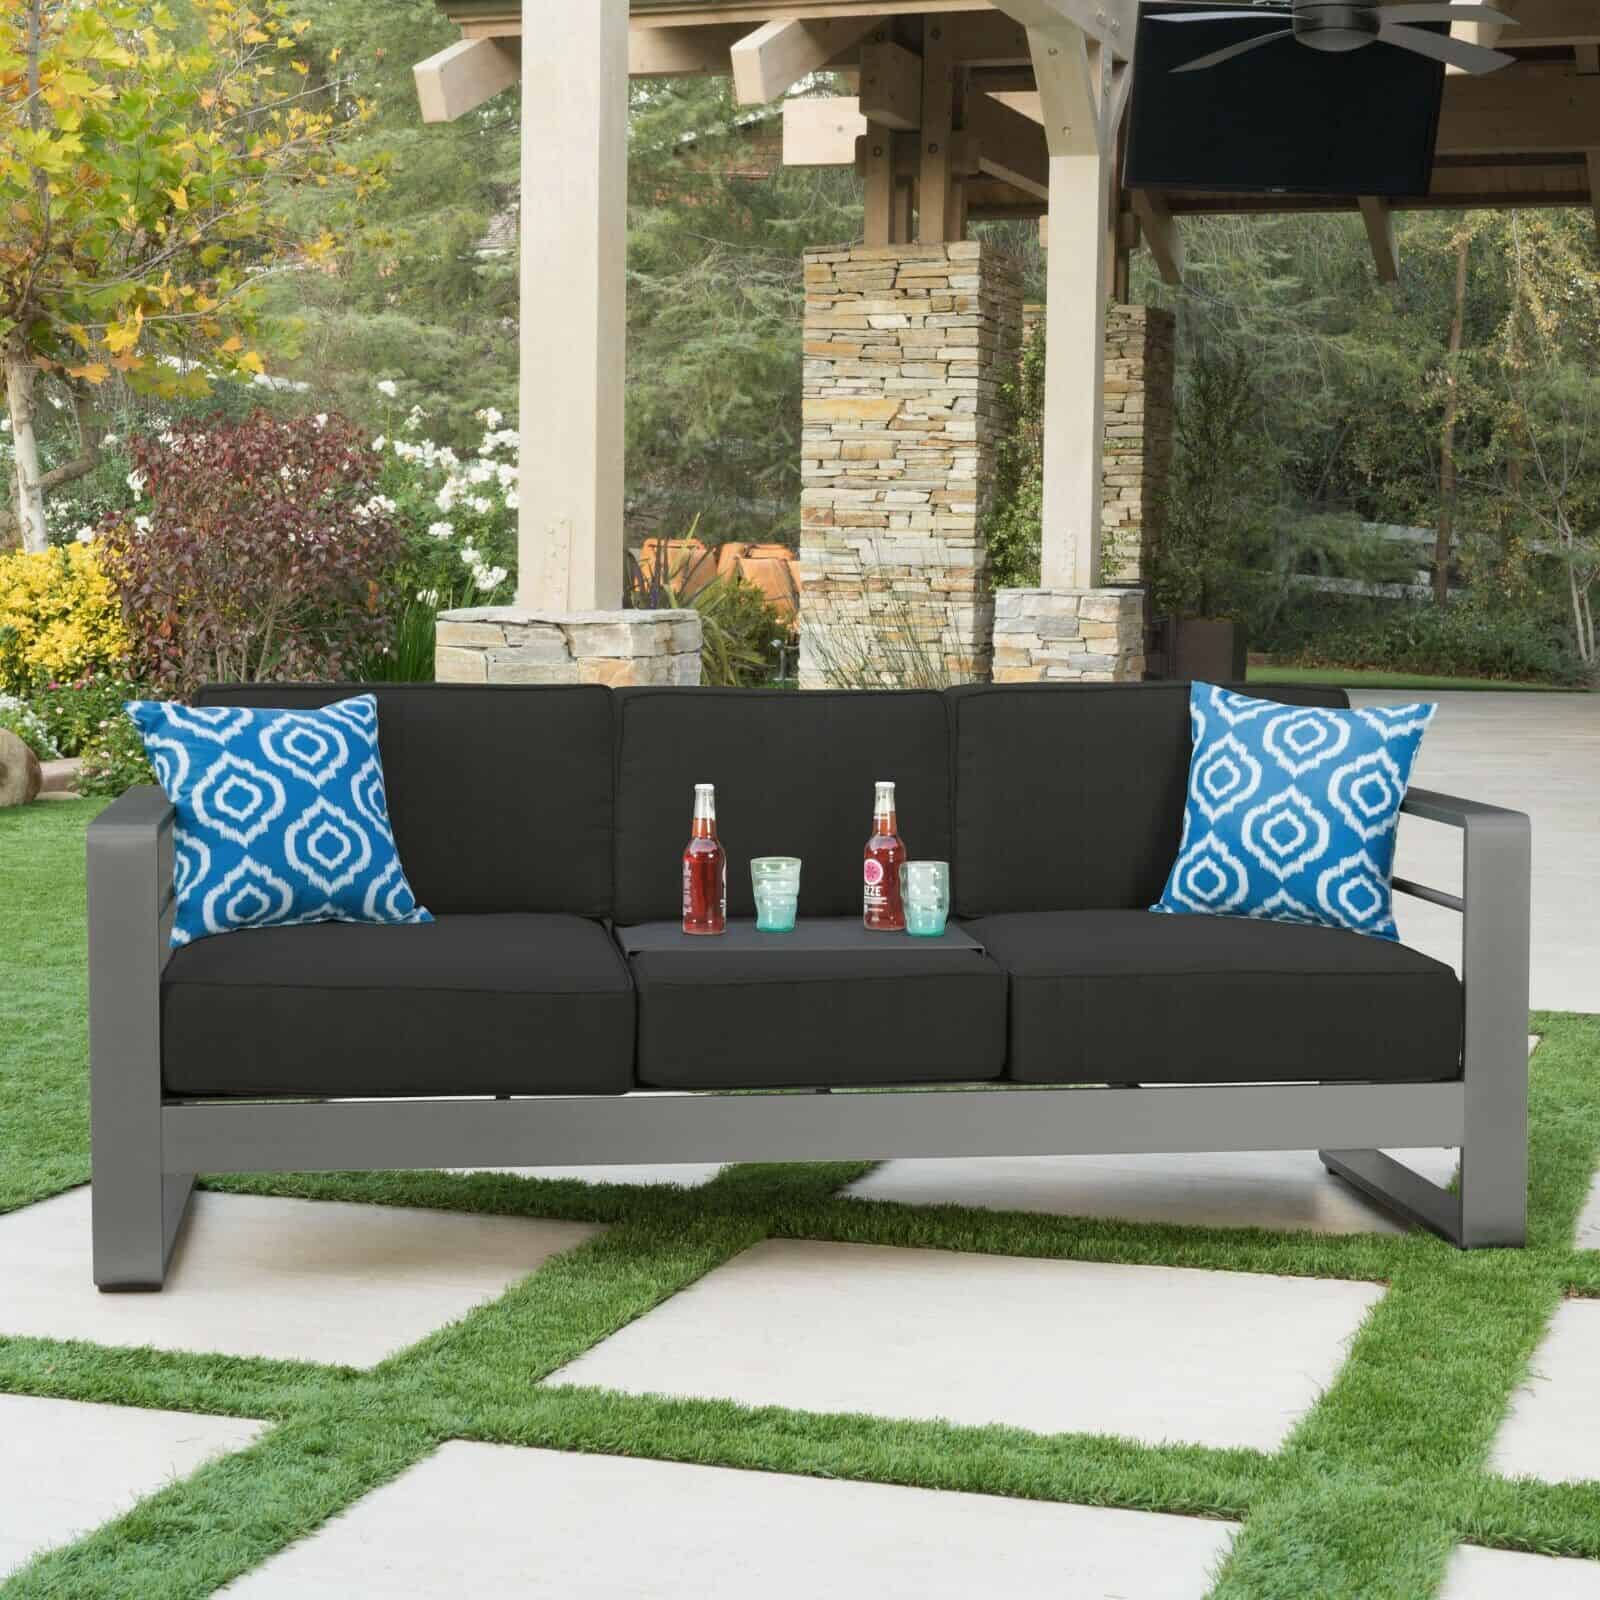 A black sofa with blue pillows on a patio.